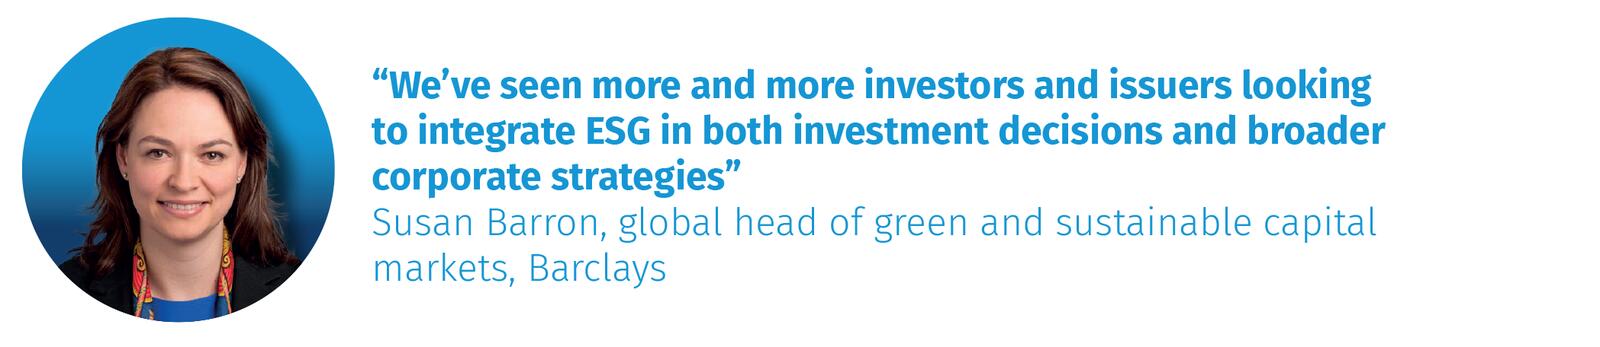 Susan Barron, global head of green and sustainable capital markets, Barclays